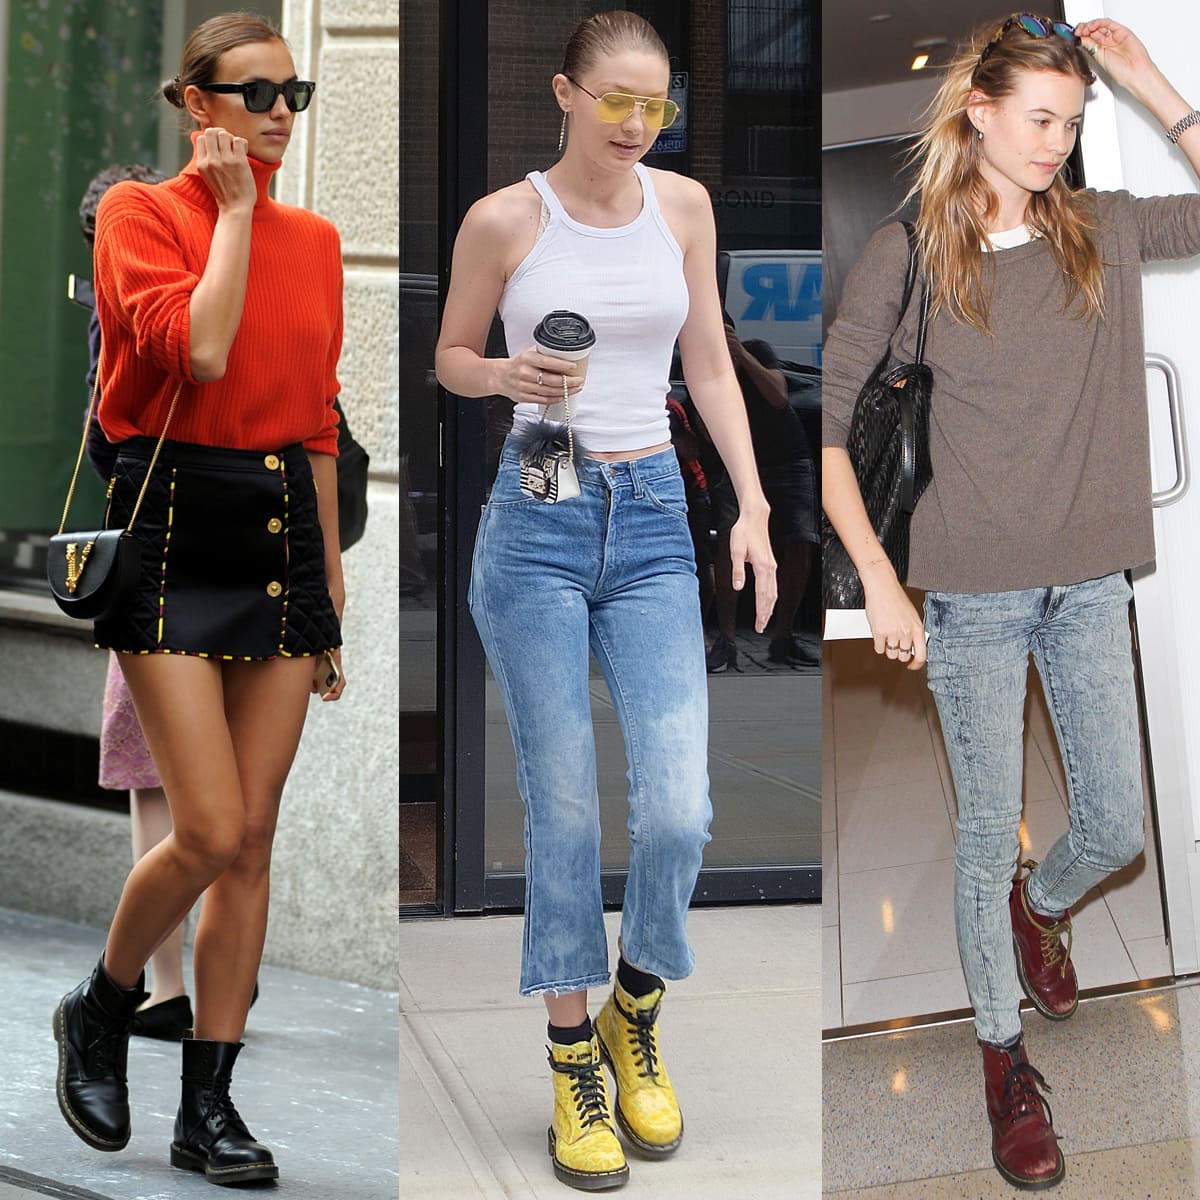 Dr. Martens boots are a celebrity staple for fall: Here's why